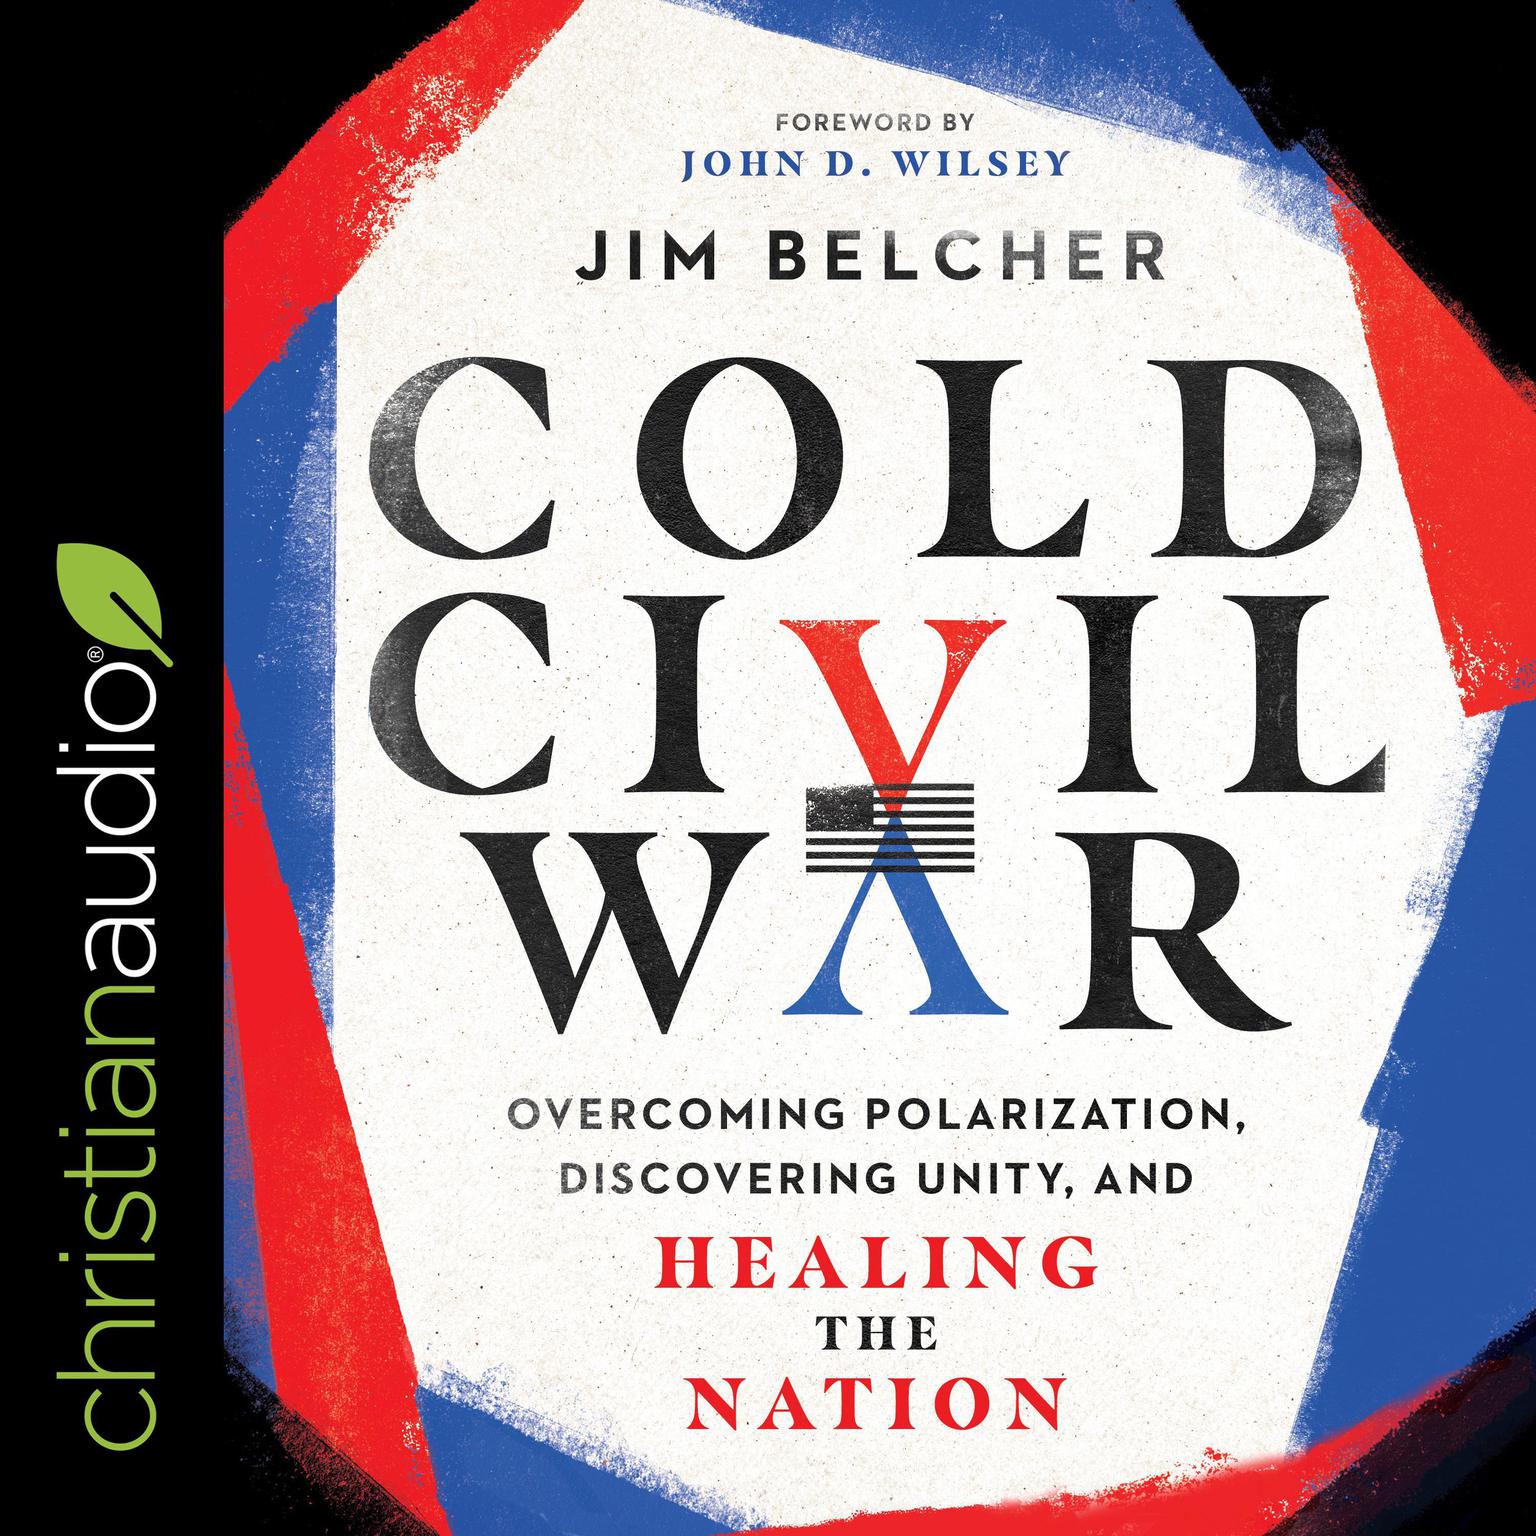 Cold Civil War: Overcoming Polarization, Discovering Unity, and Healing the Nation Audiobook, by Jim Belcher